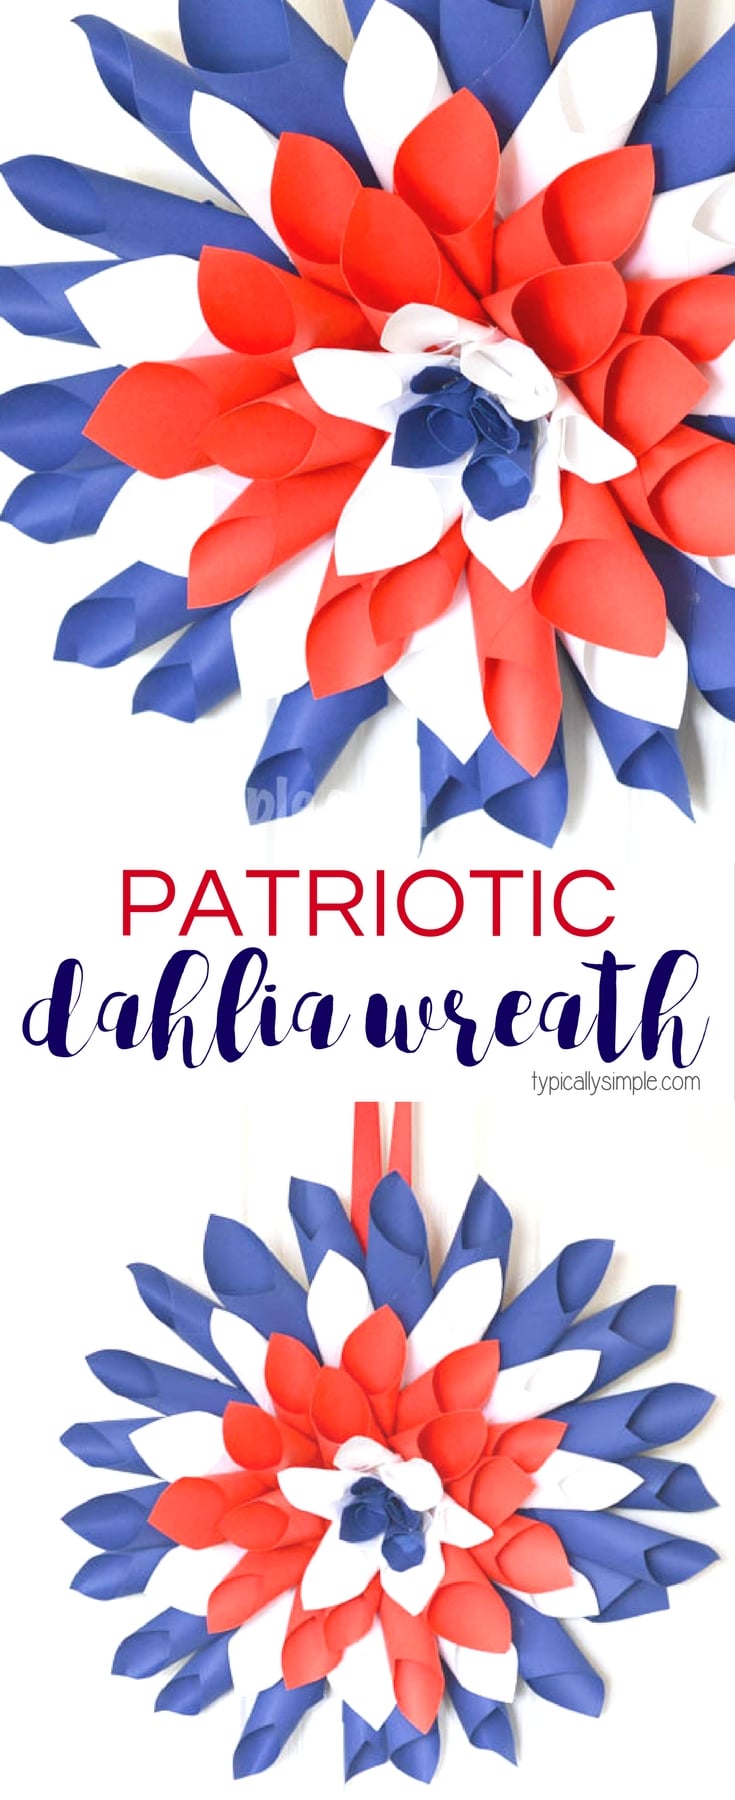 This red, white, and blue paper Dahlia wreath is a simple one-hour craft that is a fun decoration to hang in your home for 4th of July, Memorial Day, or Labor Day!